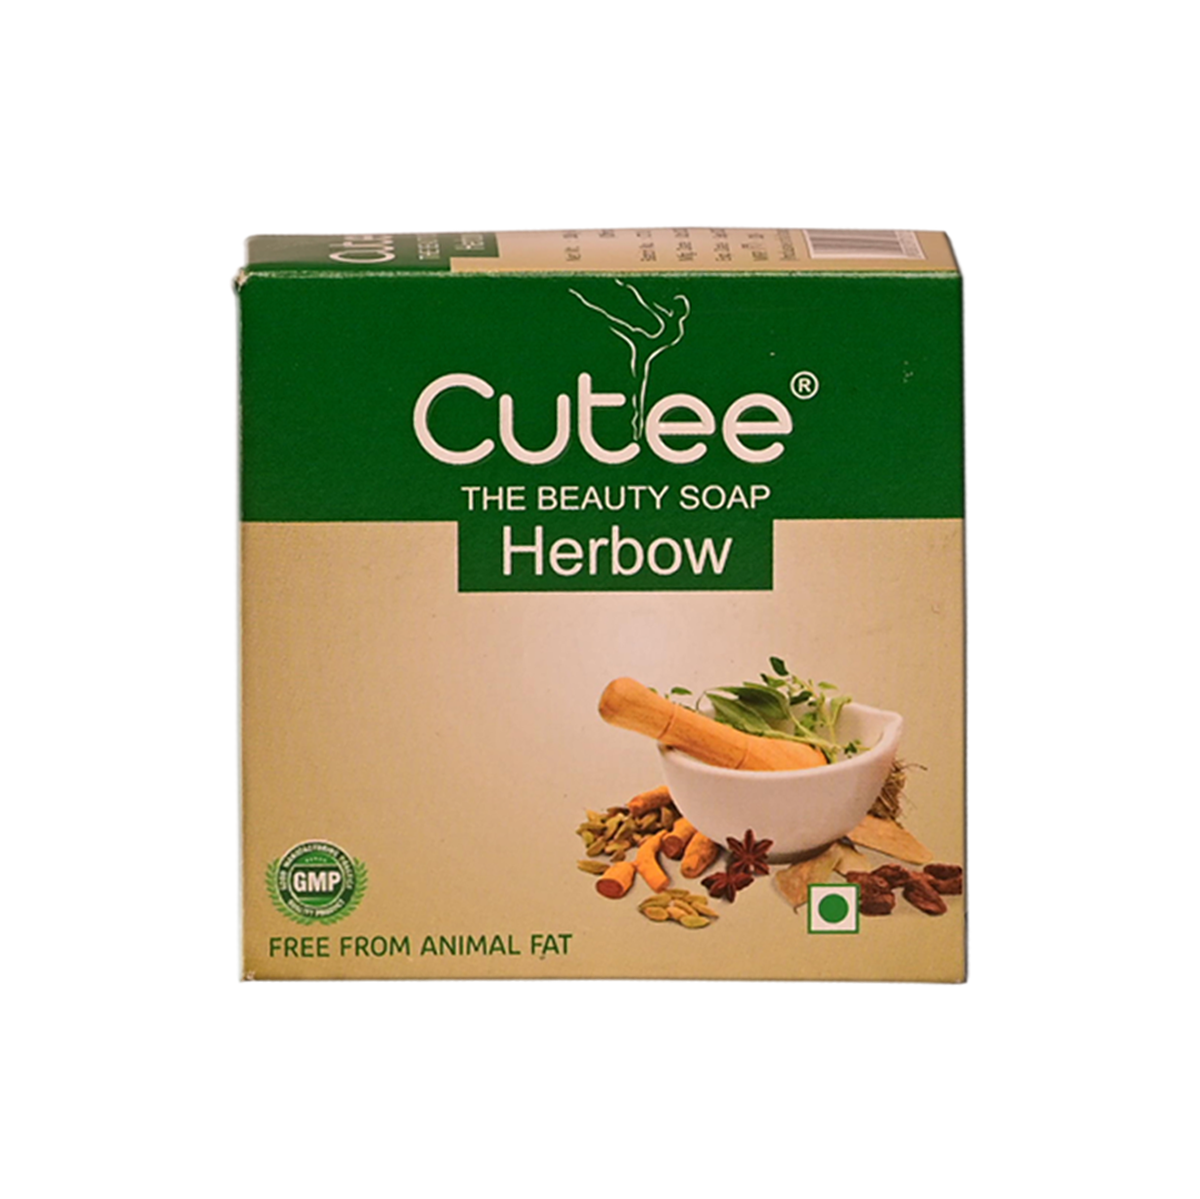 Herbow Soap